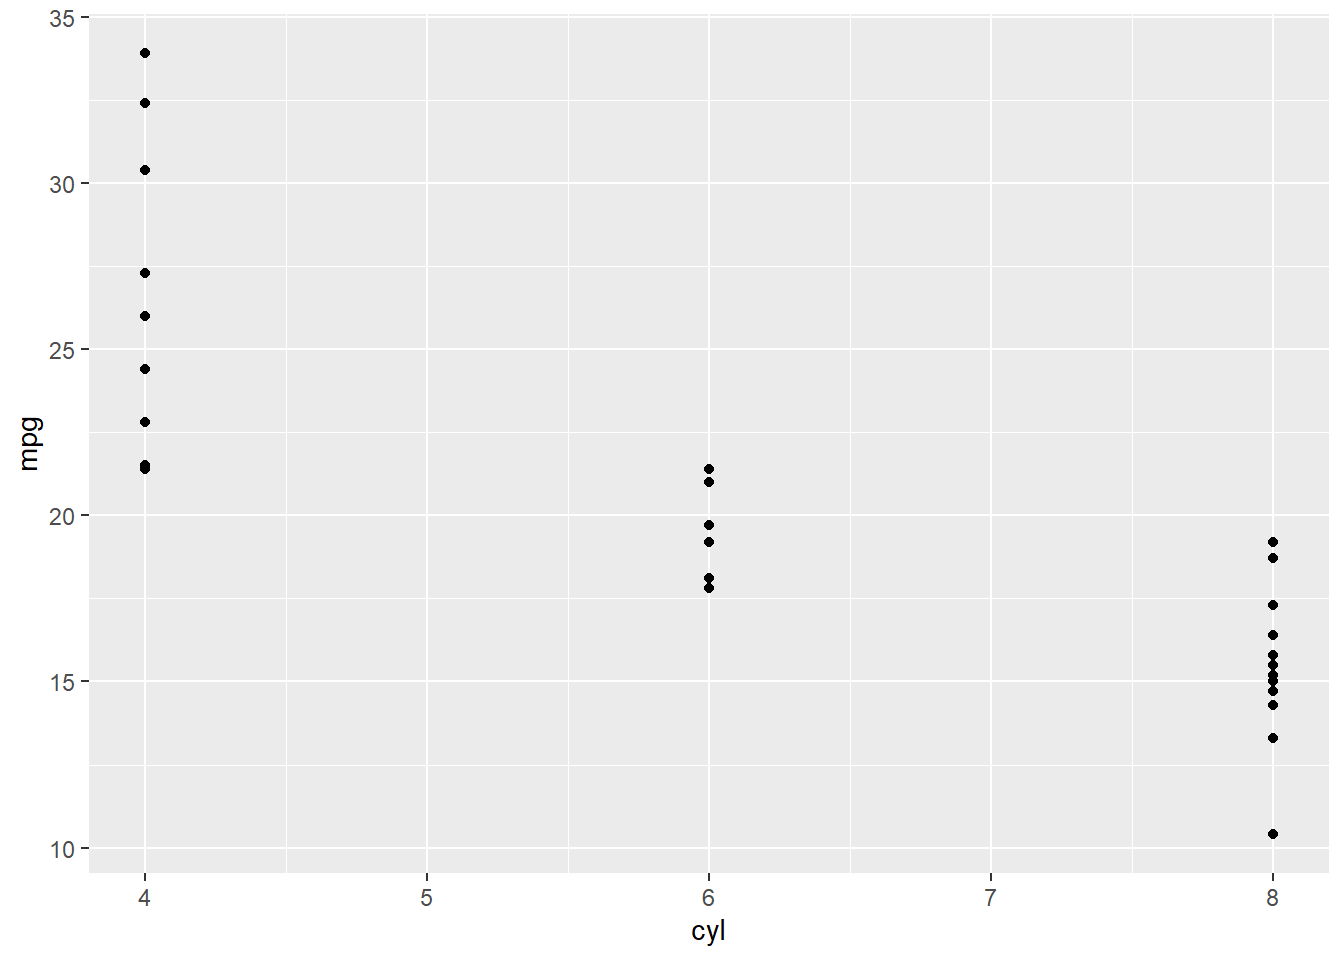 Scatterplot of the mtcars dataset showing miles per gallon as a function of number of cylinders.